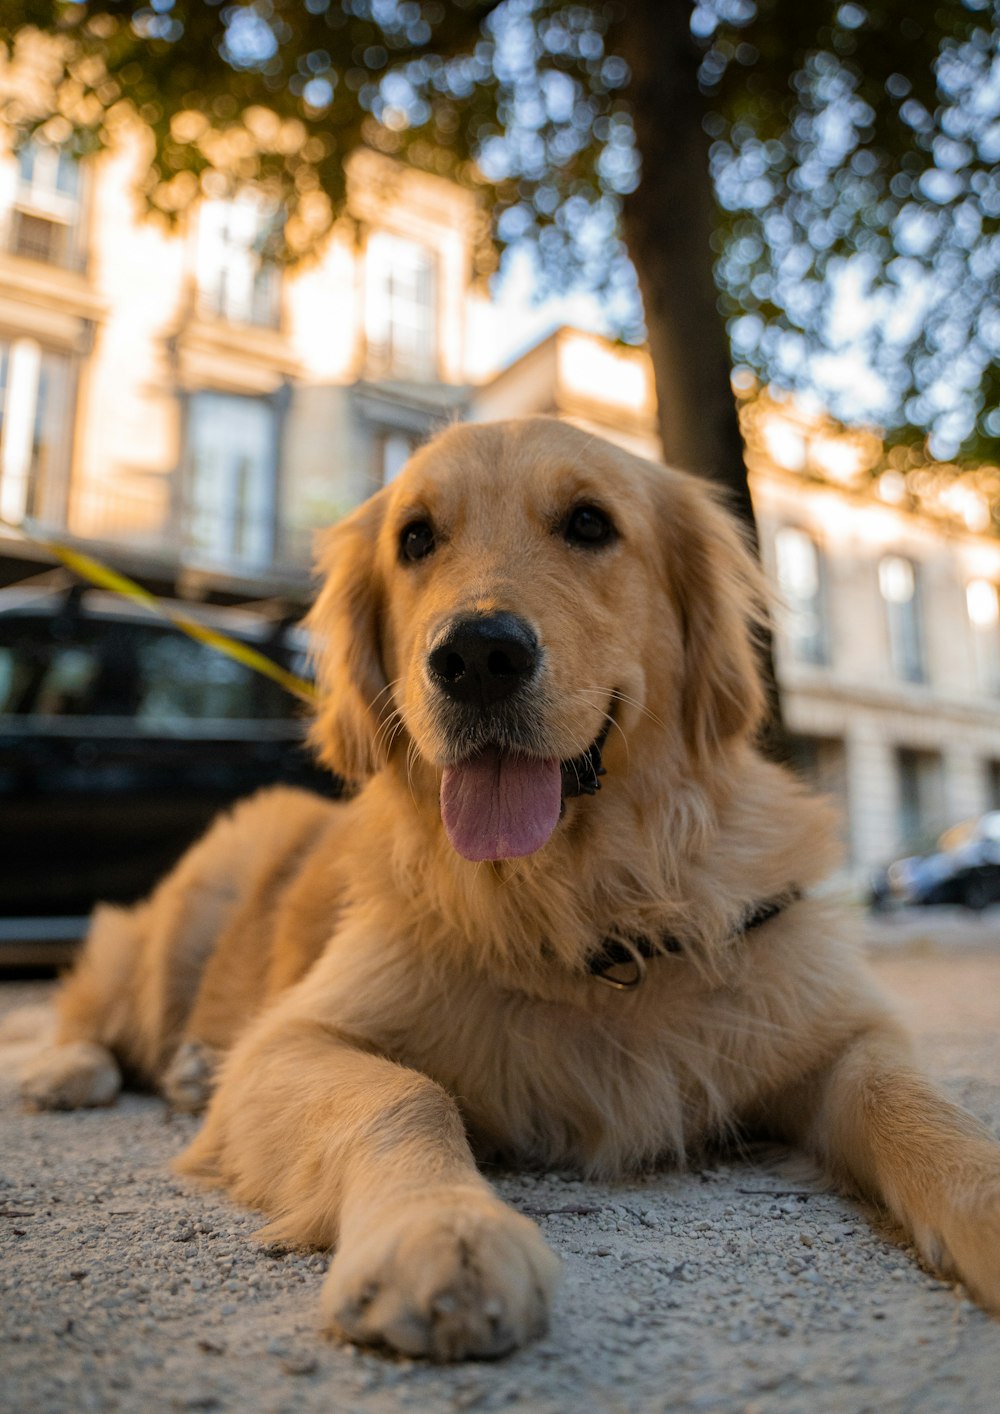 Dog Pictures Pictures | Download Free Images on Unsplash